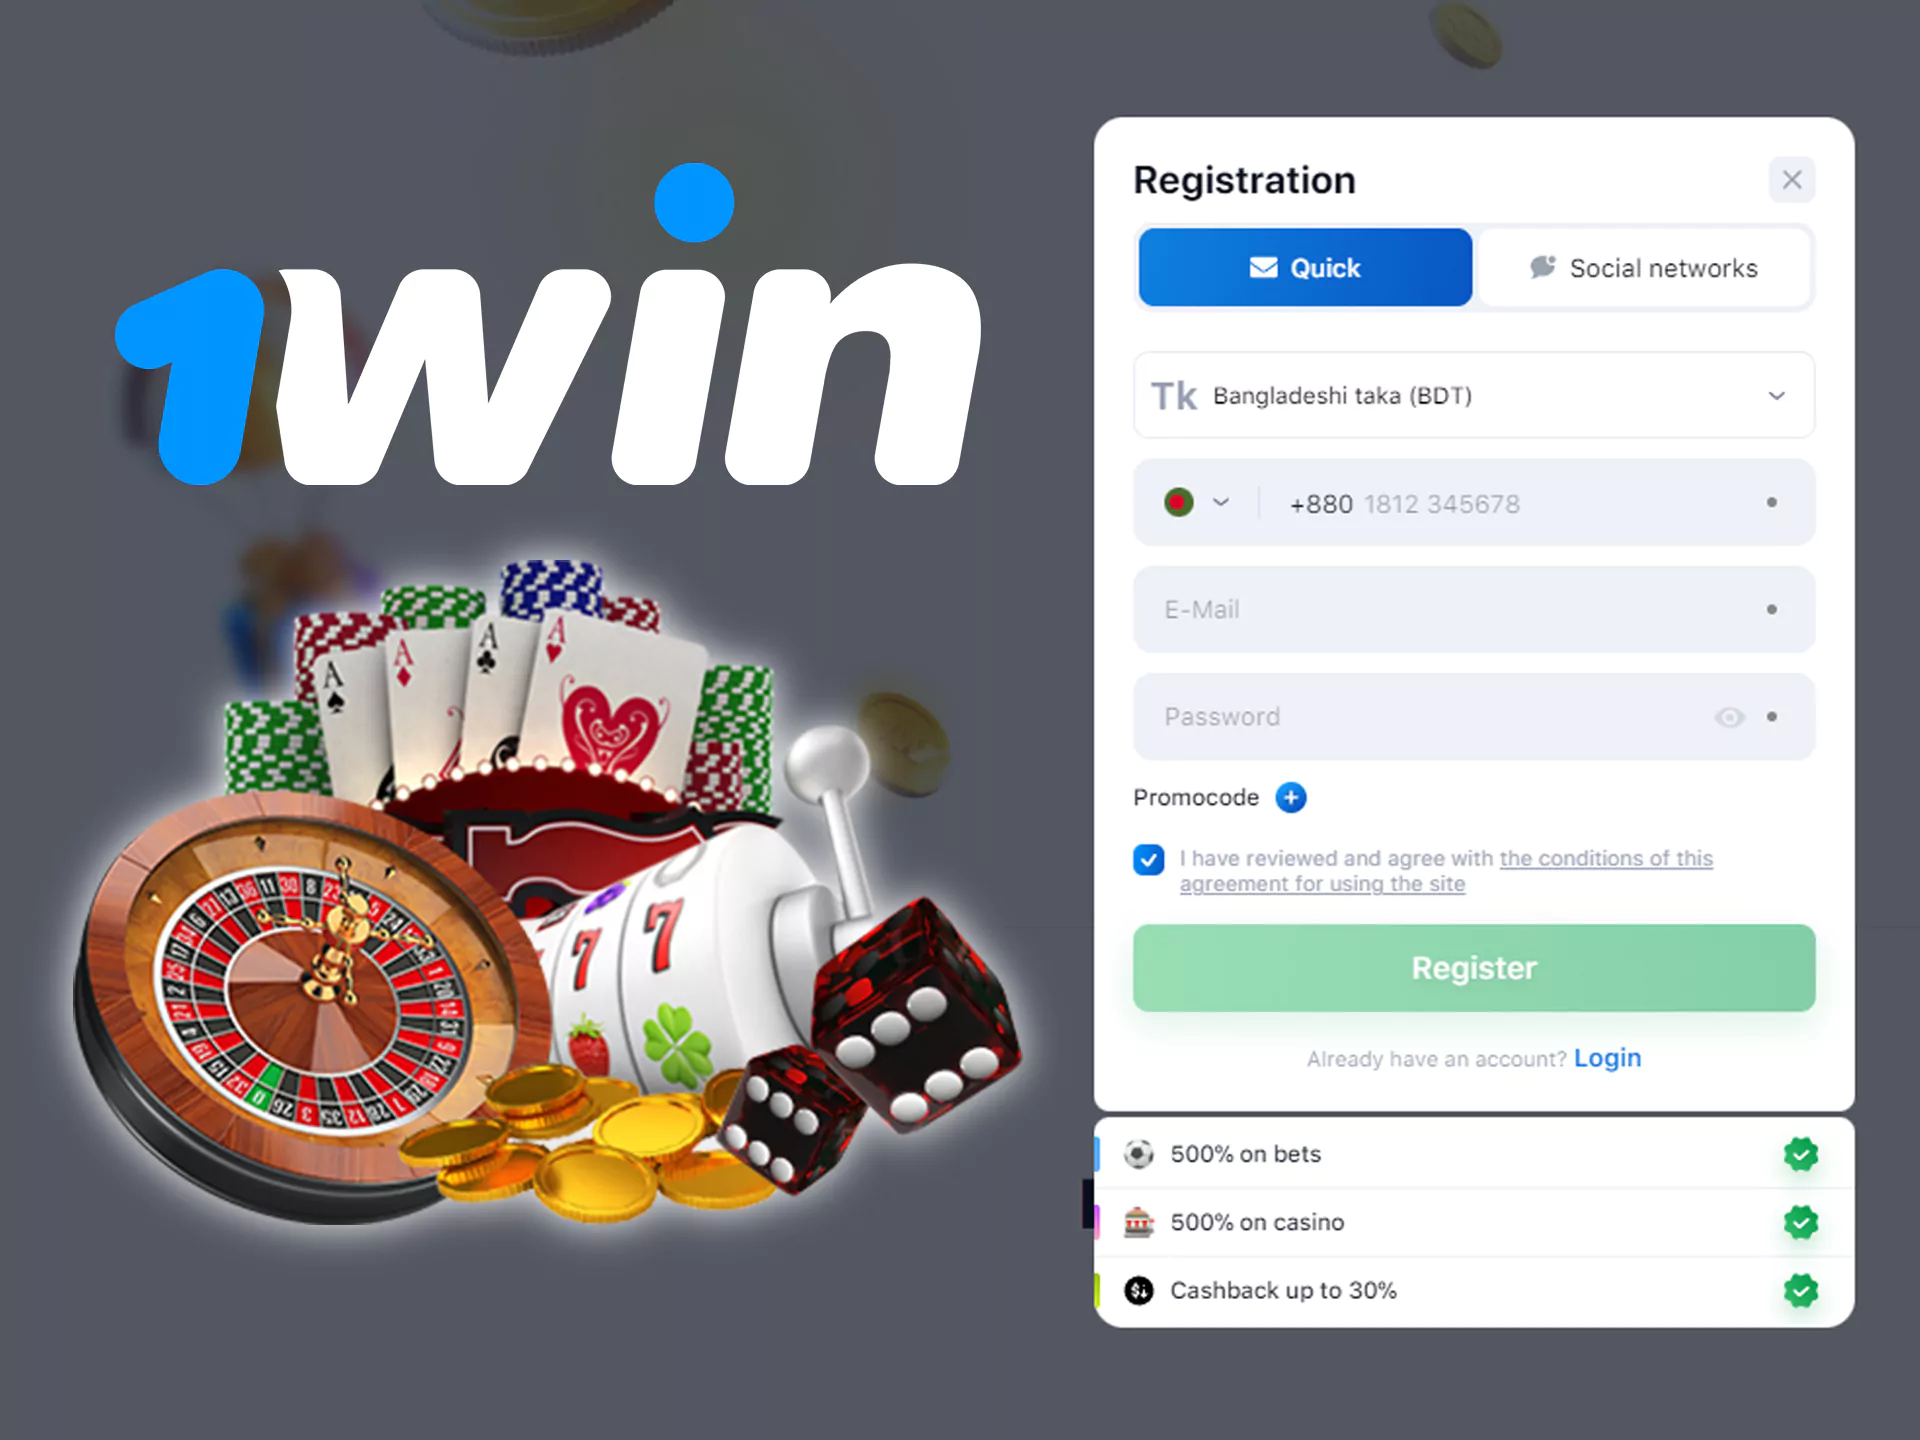 To get your casino bonus you need to complete the registration process.